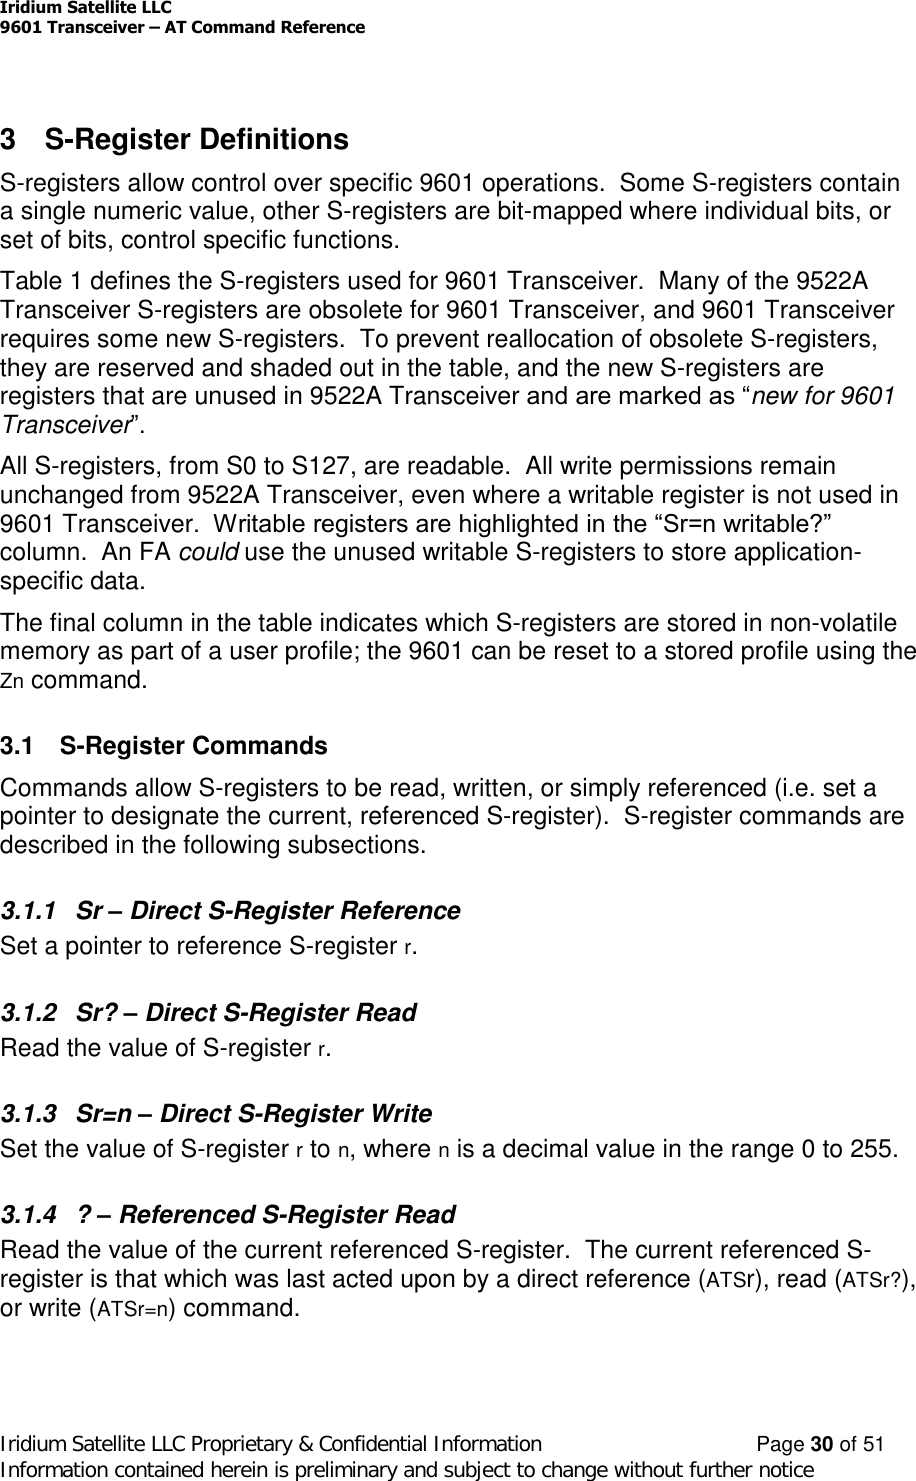 Iridium Satellite LLC9601 Transceiver –AT Command ReferenceIridium Satellite LLC Proprietary &amp; Confidential Information Page 30 of 51Information contained herein is preliminary and subject to change without further notice3 S-Register DefinitionsS-registers allow control over specific 9601 operations. Some S-registers containa single numeric value, other S-registers are bit-mapped where individual bits, orset of bits, control specific functions.Table 1 defines the S-registers used for 9601 Transceiver. Many of the 9522ATransceiver S-registers are obsolete for 9601 Transceiver, and 9601 Transceiverrequires some new S-registers. To prevent reallocation of obsolete S-registers,they are reserved and shaded out in the table, and the new S-registers areregisters that are unused in 9522A Transceiver and are marked as “new for 9601Transceiver”.All S-registers, from S0 to S127, are readable. All write permissions remainunchanged from 9522A Transceiver, even where a writable register is not used in9601 Transceiver.  Writable registers are highlighted in the “Sr=n writable?” column. An FA could use the unused writable S-registers to store application-specific data.The final column in the table indicates which S-registers are stored in non-volatilememory as part of a user profile; the 9601 can be reset to a stored profile using theZn command.3.1 S-Register CommandsCommands allow S-registers to be read, written, or simply referenced (i.e. set apointer to designate the current, referenced S-register). S-register commands aredescribed in the following subsections.3.1.1 Sr –Direct S-Register ReferenceSet a pointer to reference S-register r.3.1.2 Sr? –Direct S-Register ReadRead the value of S-register r.3.1.3 Sr=n –Direct S-Register WriteSet the value of S-register rto n, where nis a decimal value in the range 0 to 255.3.1.4 ? –Referenced S-Register ReadRead the value of the current referenced S-register. The current referenced S-register is that which was last acted upon by a direct reference (ATSr), read (ATSr?),or write (ATSr=n) command.